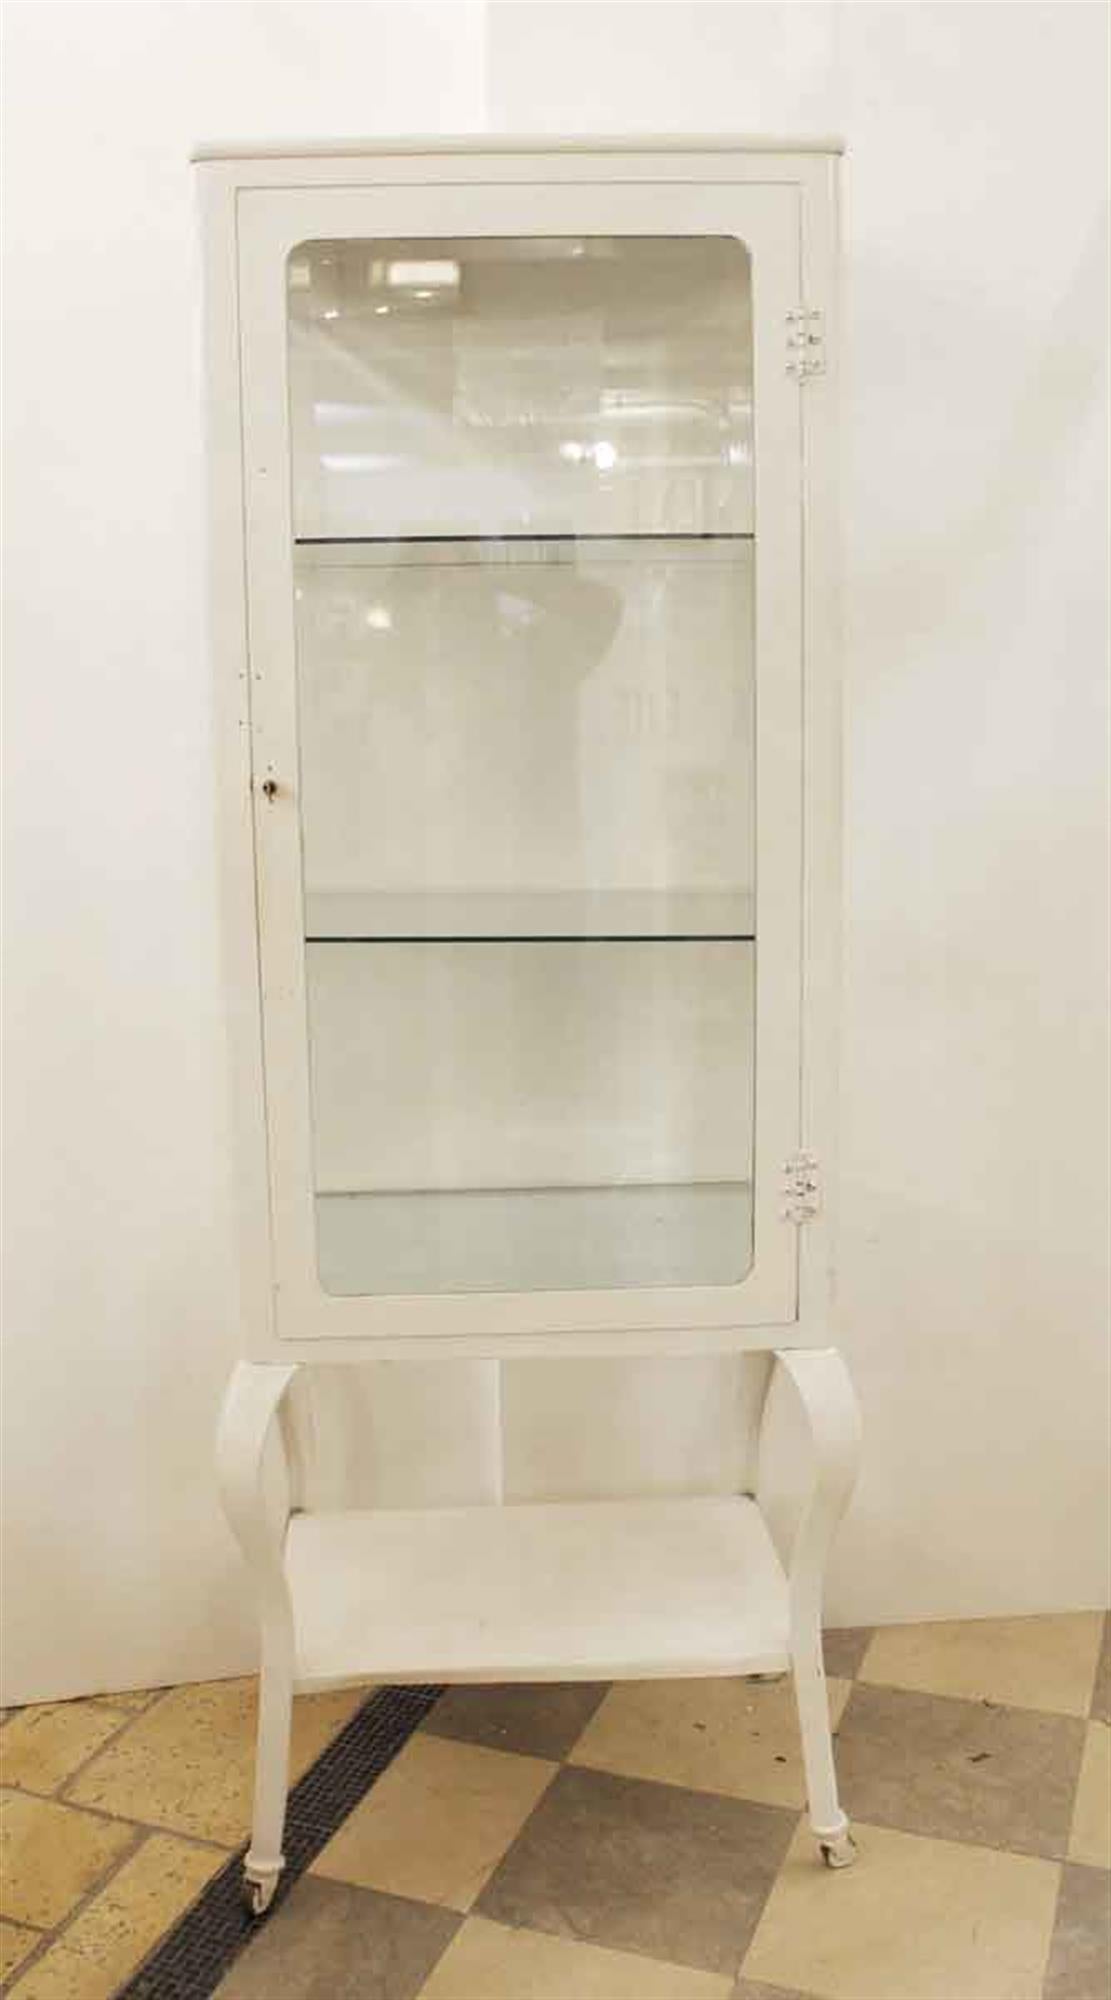 Early 20th century circa 1920 painted white metal medical cabinet with cabriole legs and original beveled glass on the front and sides. This cabinet includes two glass shelves. This cabinet is made from cold-rolled steel and was used in hospital